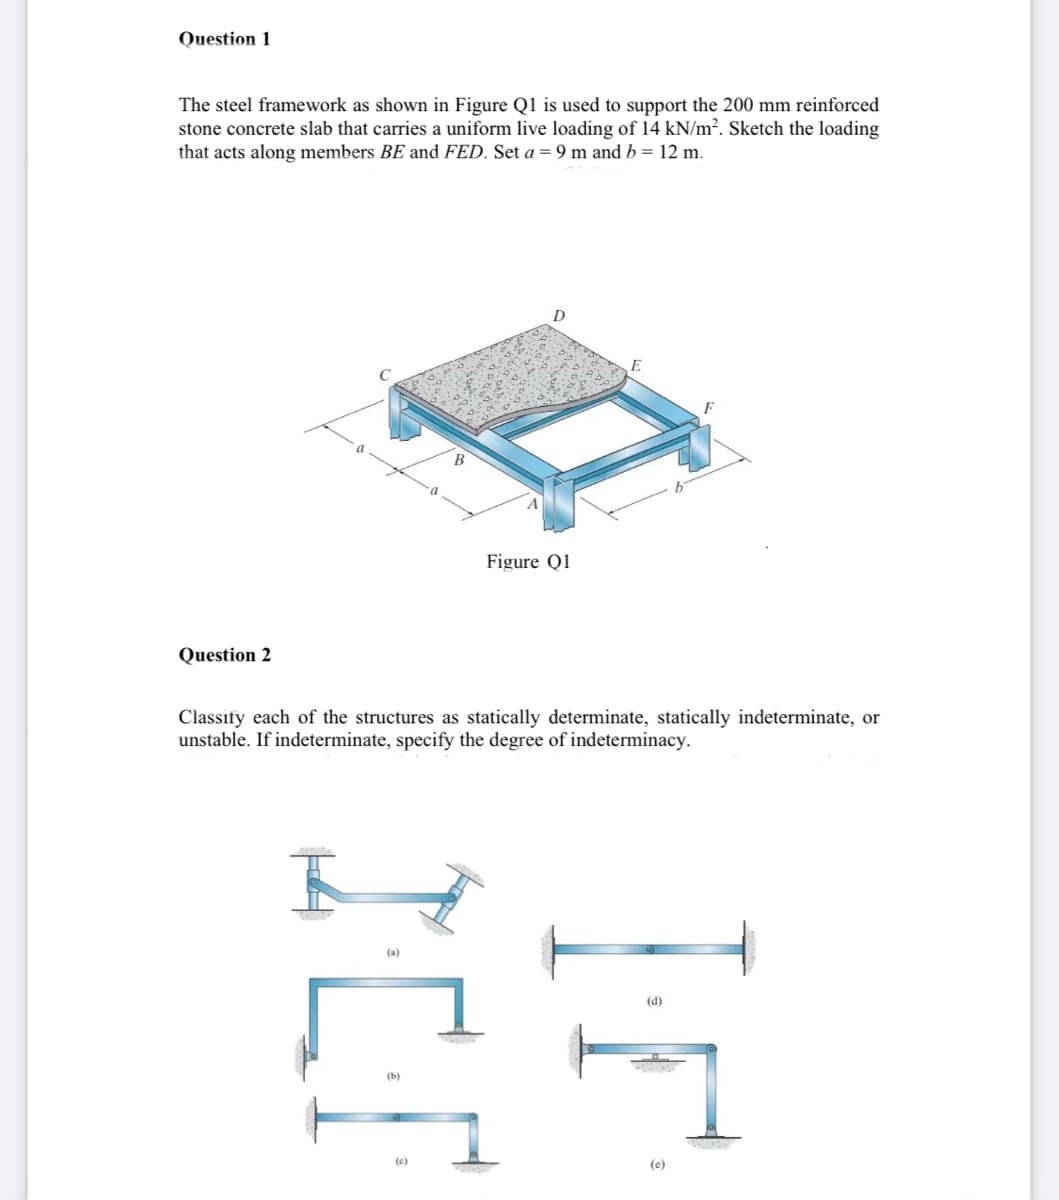 Question 1
The steel framework as shown in Figure Q1 is used to support the 200 mm reinforced
stone concrete slab that carries a uniform live loading of 14 kN/m². Sketch the loading
that acts along members BE and FED. Set a = 9 m and b = 12 m.
D
Figure Q1
Question 2
Classify each of the structures as statically determinate, statically indeterminate, or
unstable. If indeterminate, specify the degree of indeterminacy.
(a)
(d)
(b)
(c)
(e)
